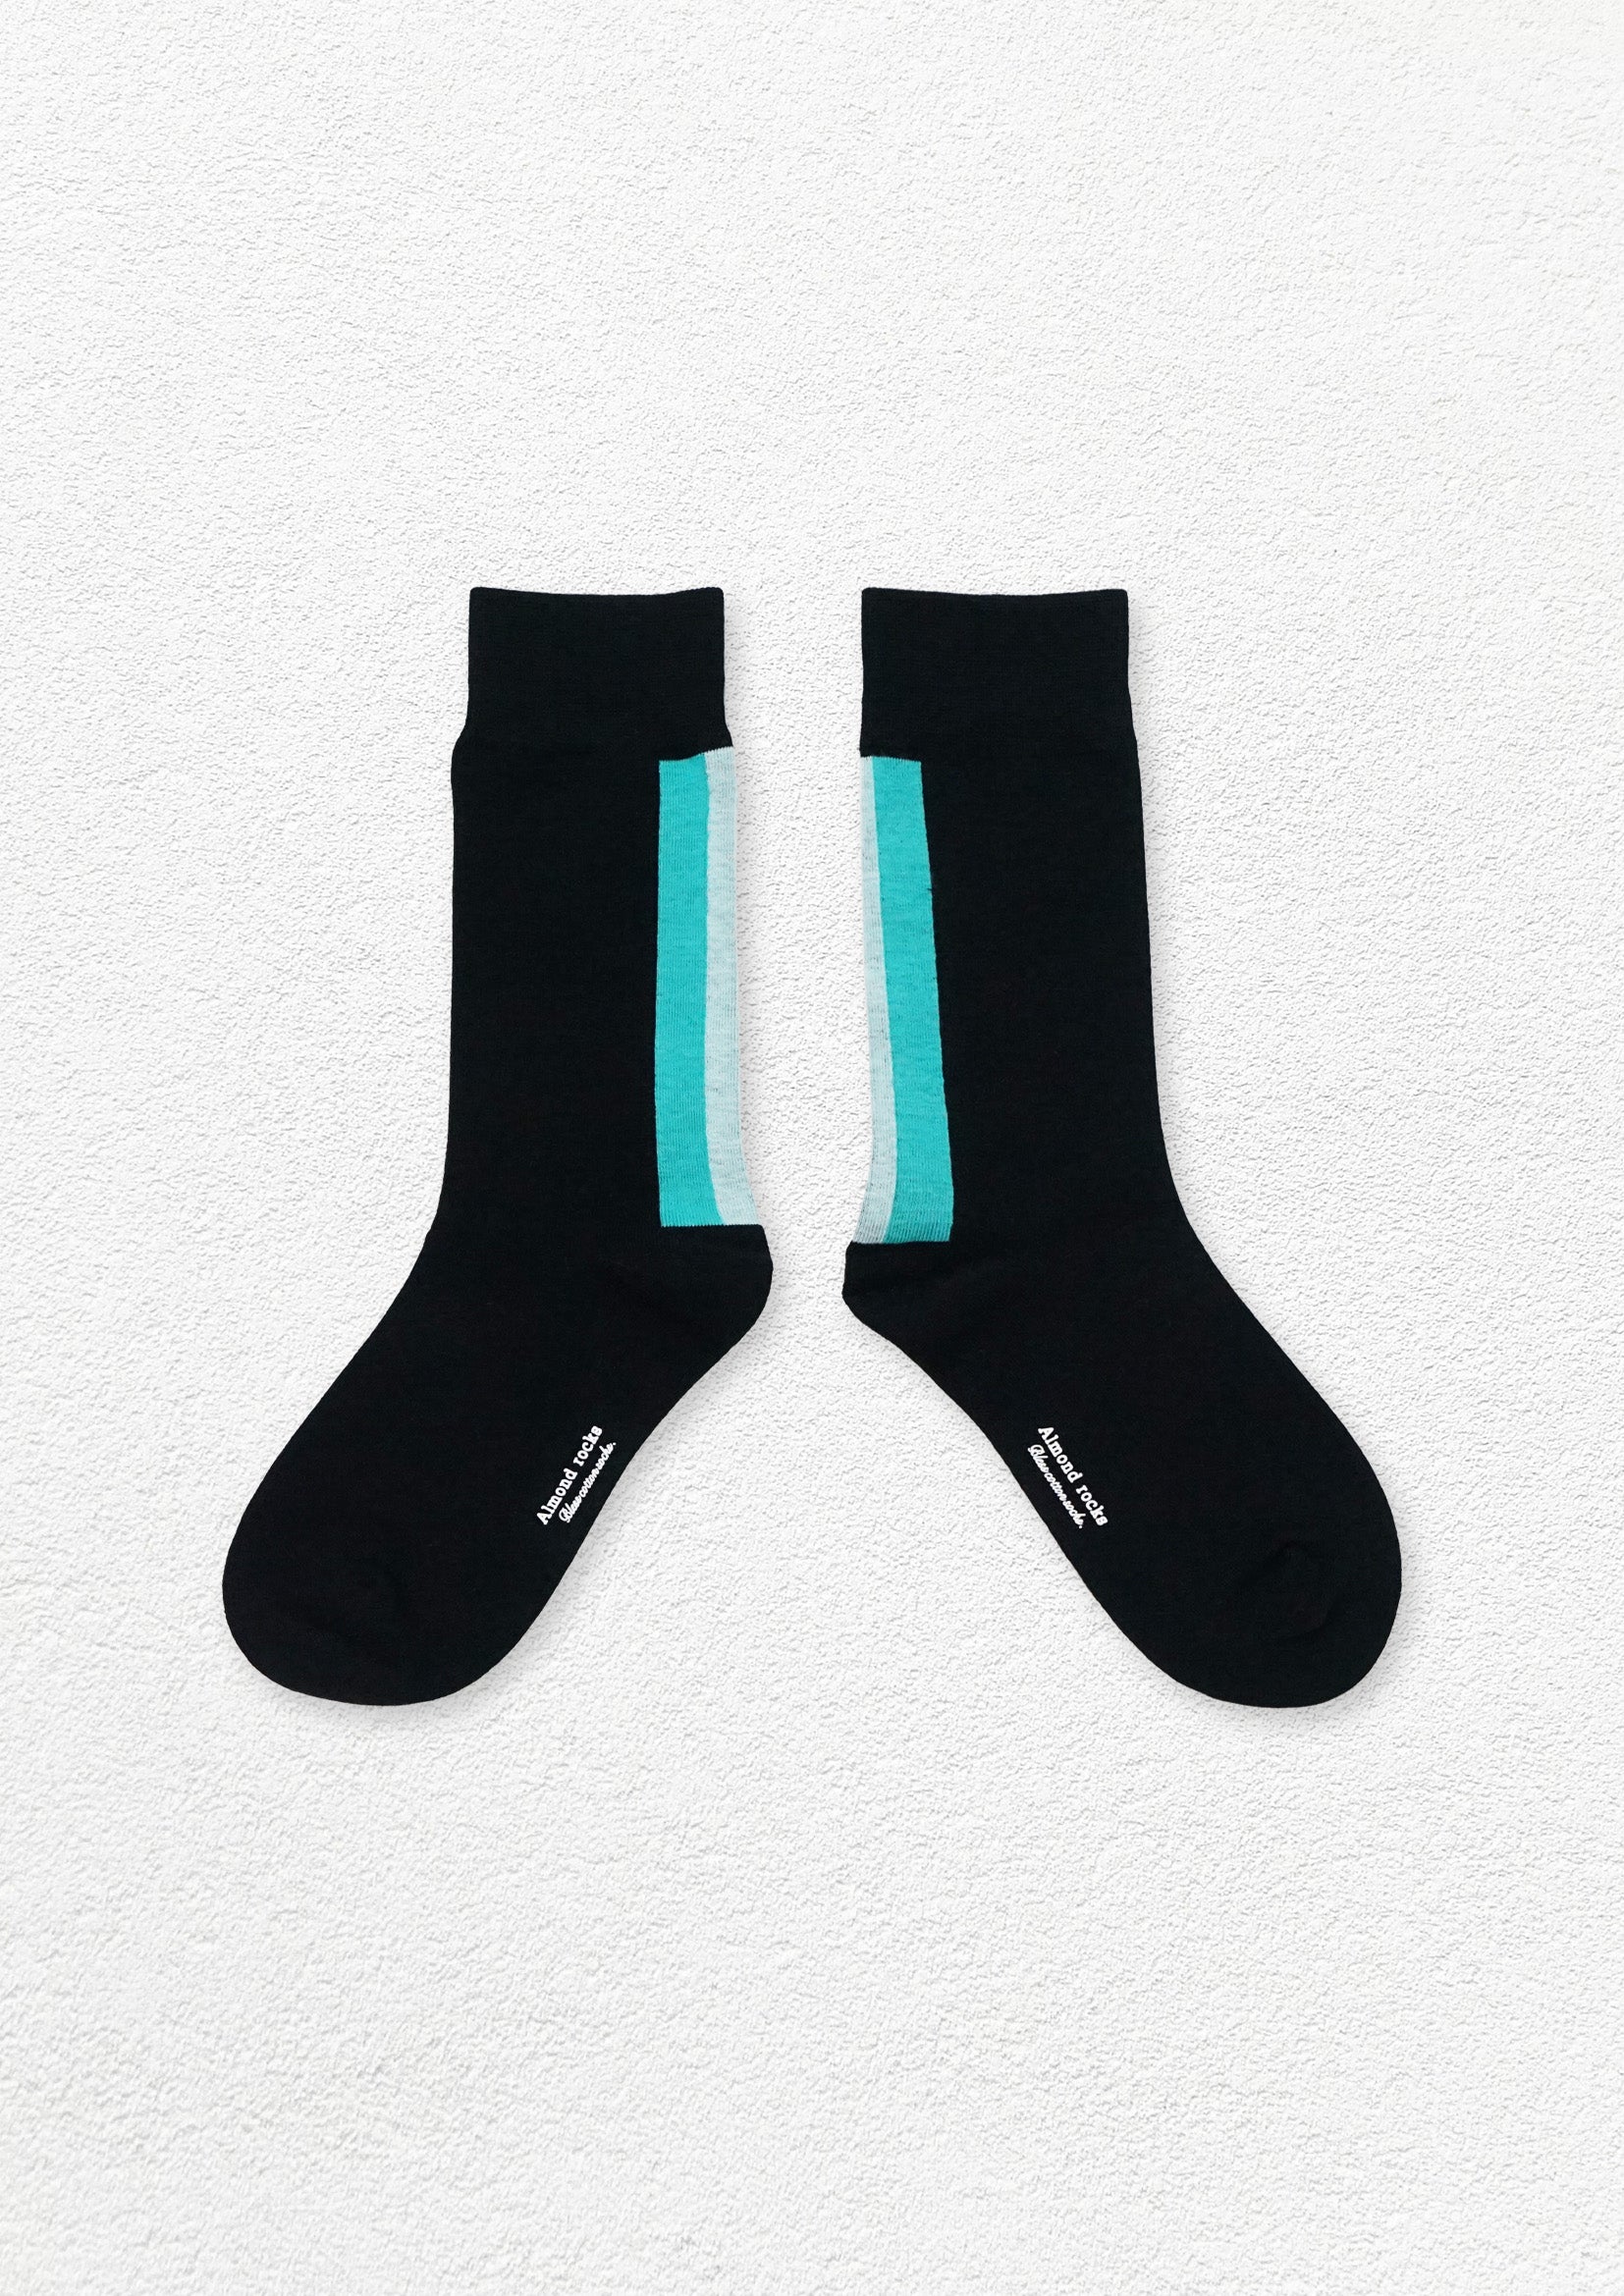 Colour collage mid-calf sock - turquoise